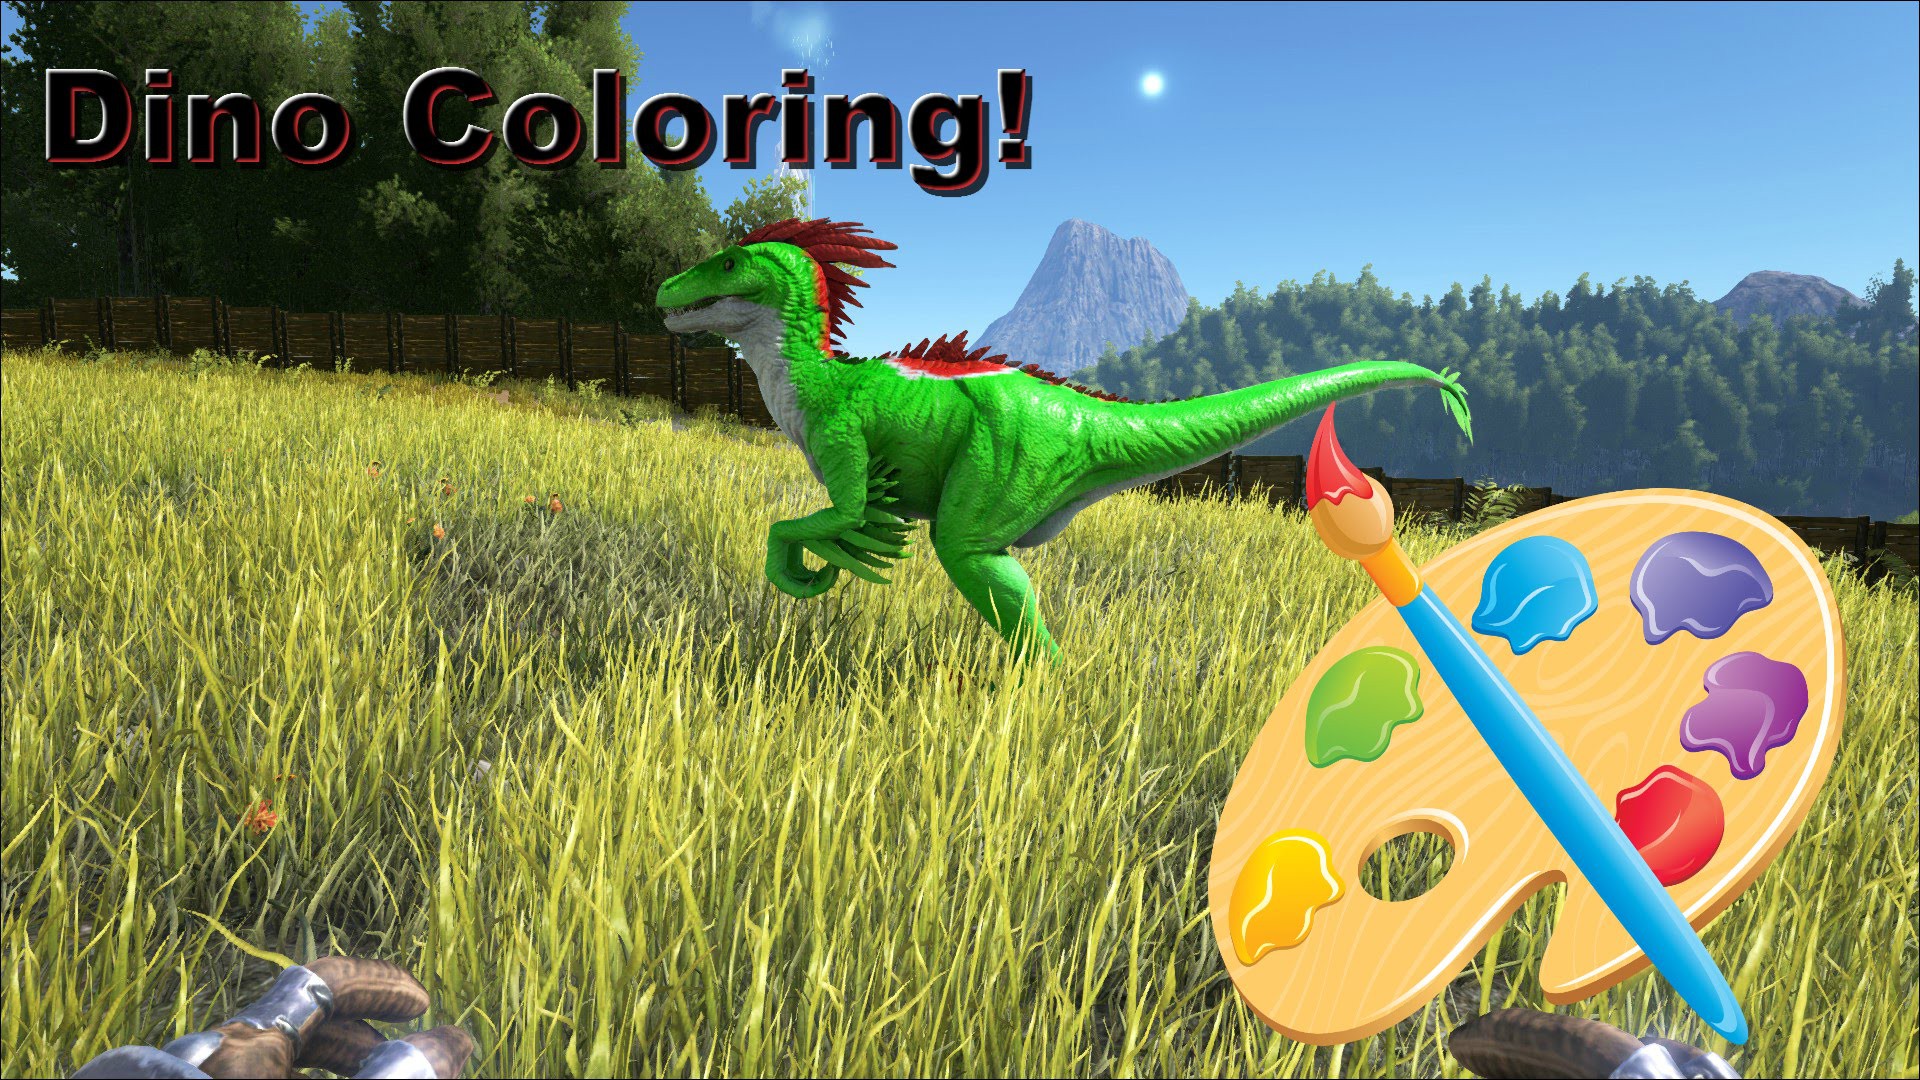 Ark Survival Evolved How to Paint Color dinos on Xbox e Admin mands